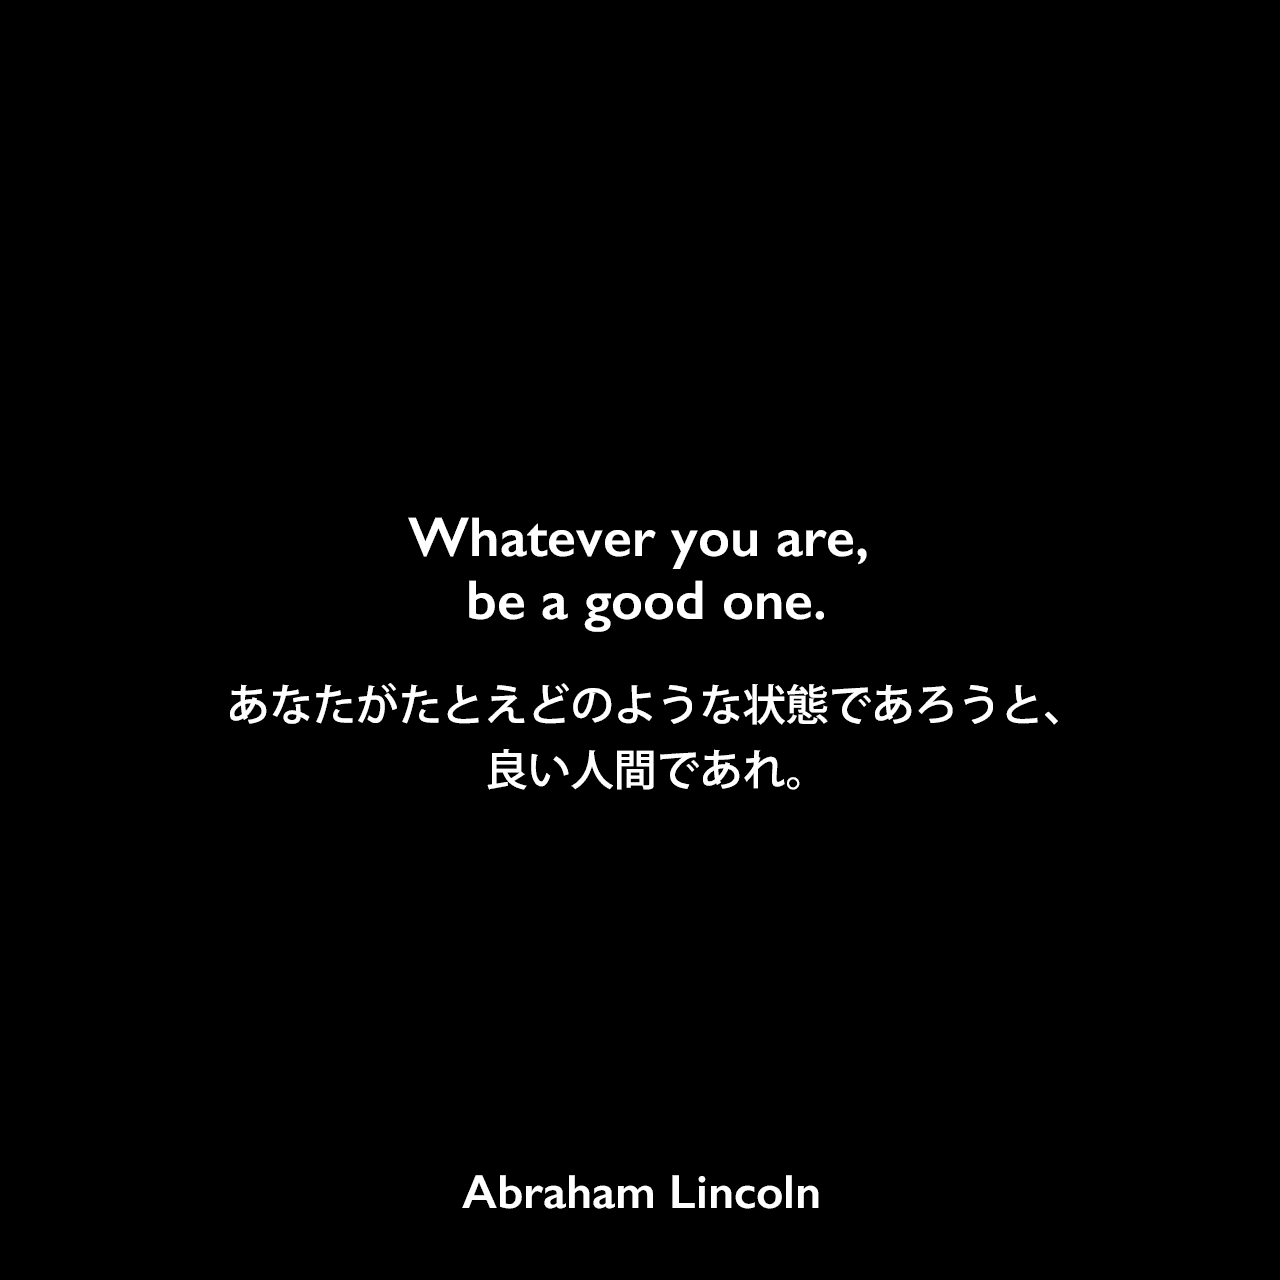 Whatever you are, be a good one.あなたがたとえどのような状態であろうと、良い人間であれ。